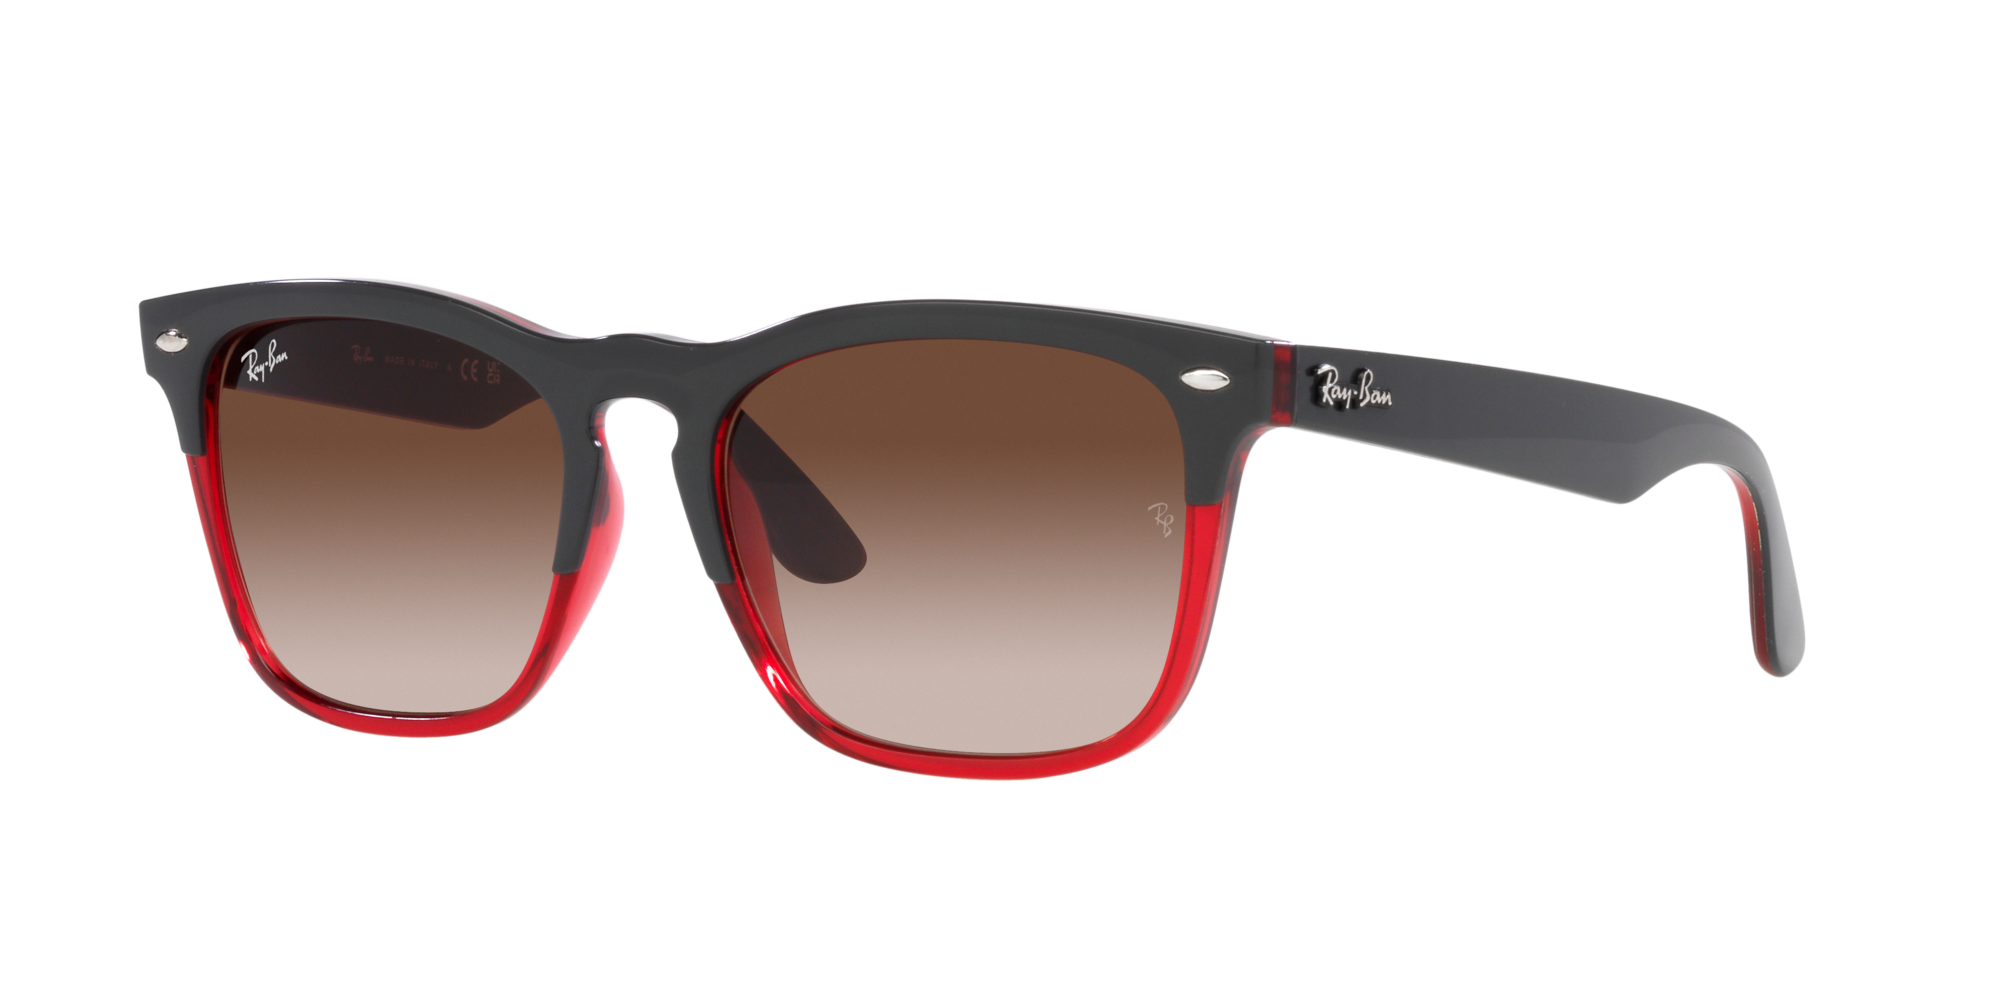 Ray-Ban Unisex Sonnenbrille in Grau/Rot RB4487 663113 54